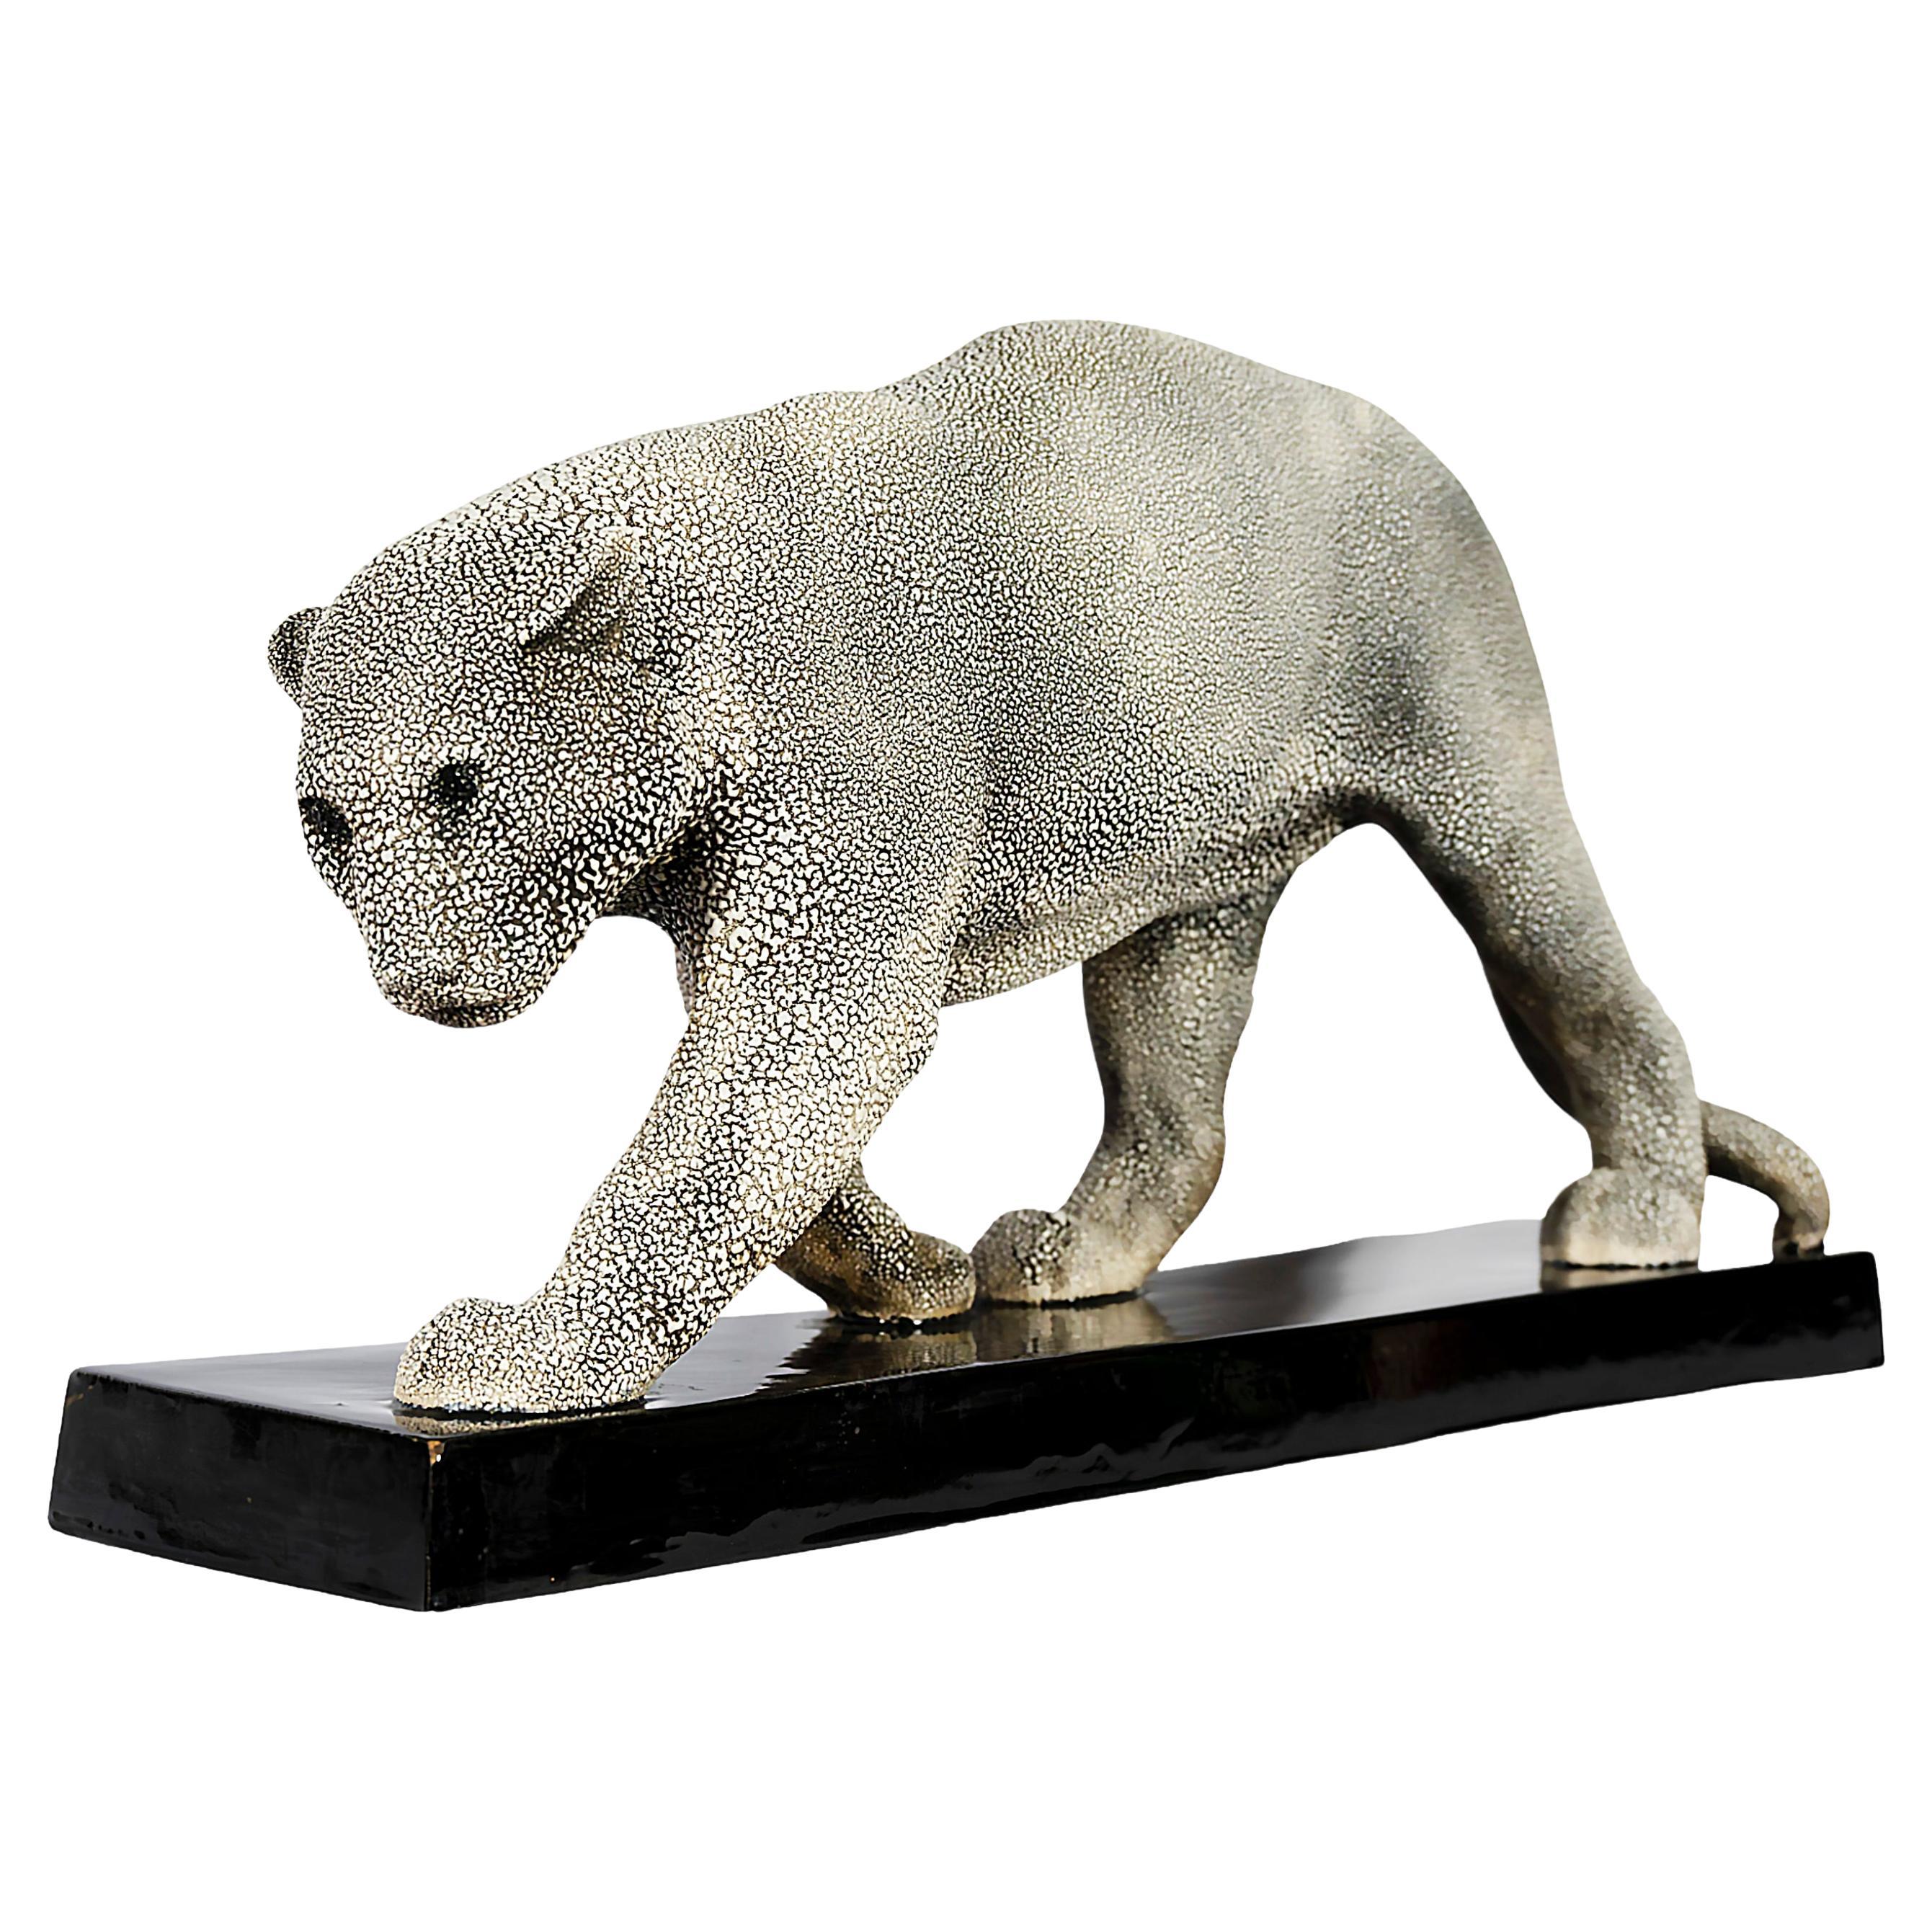 French Art Deco Ceramic Panther Sculpture by G.Beauvais for Edition Kaza, 1930's In Good Condition For Sale In Vilnius, LT